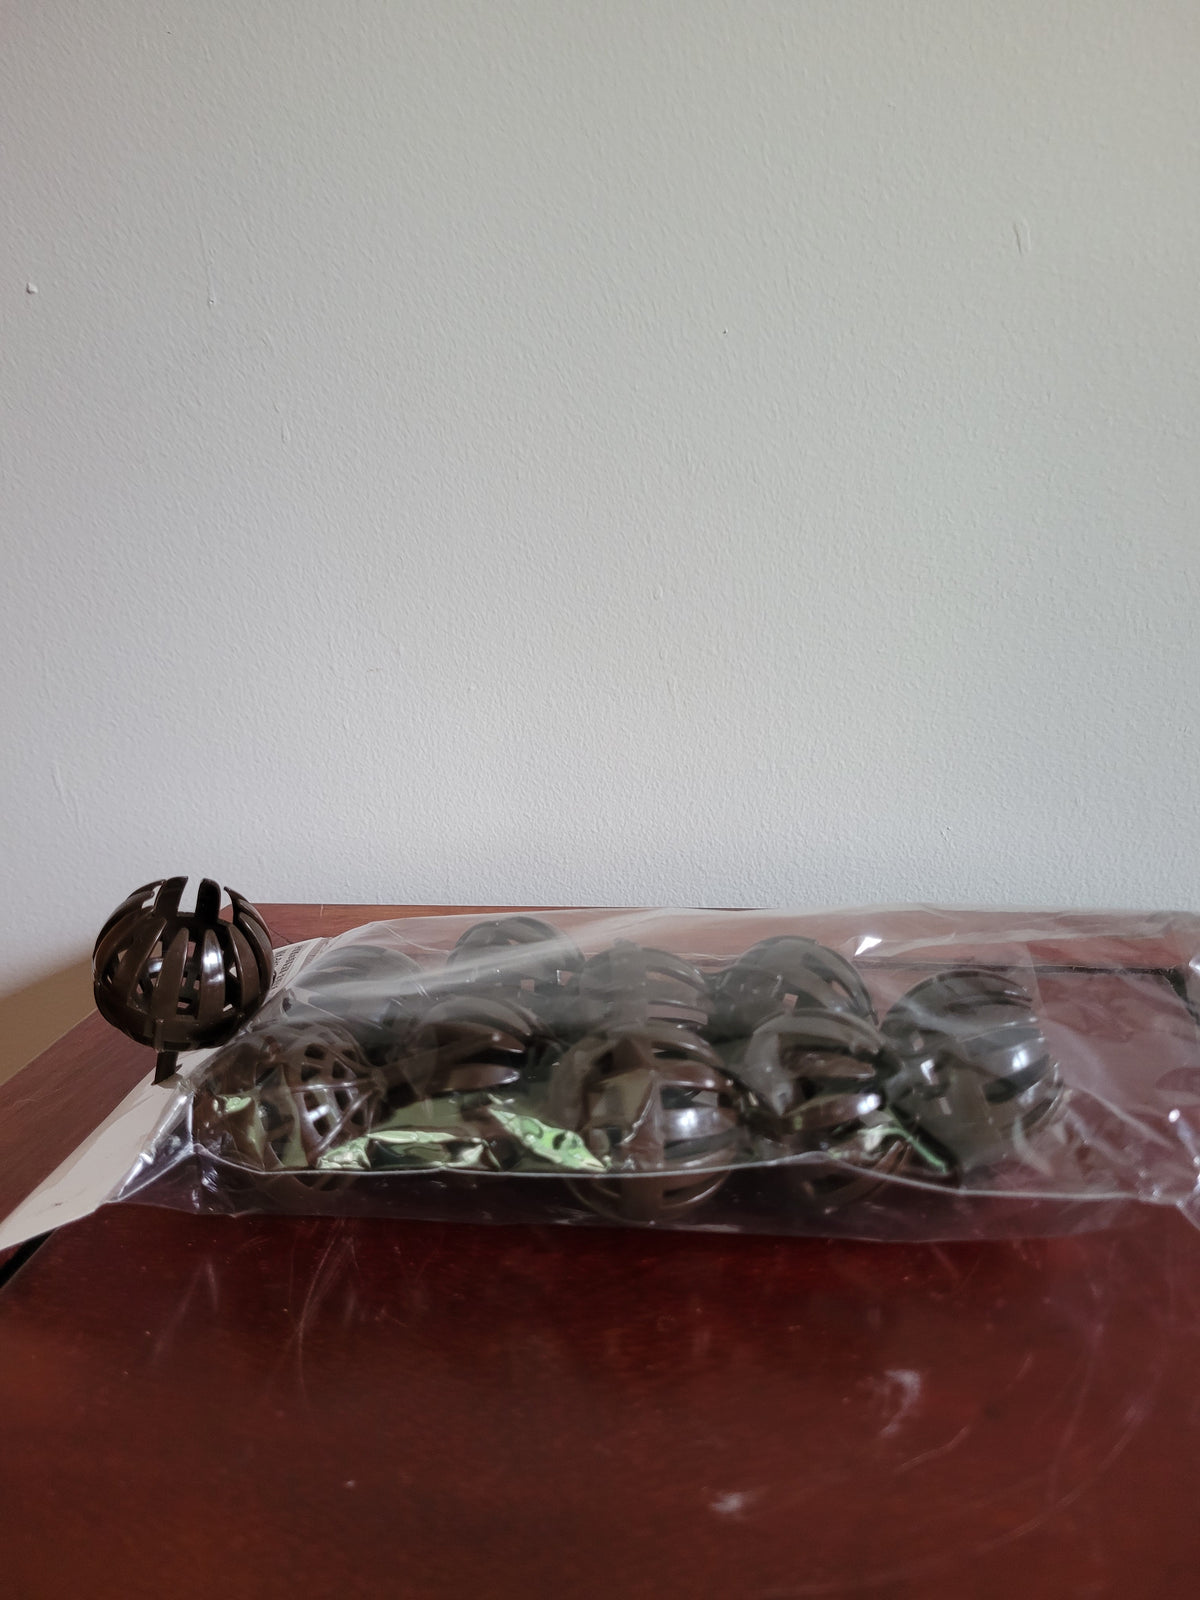 Package of 10 pieces - 1" fertilizer dispensing balls (plastic from Japan)